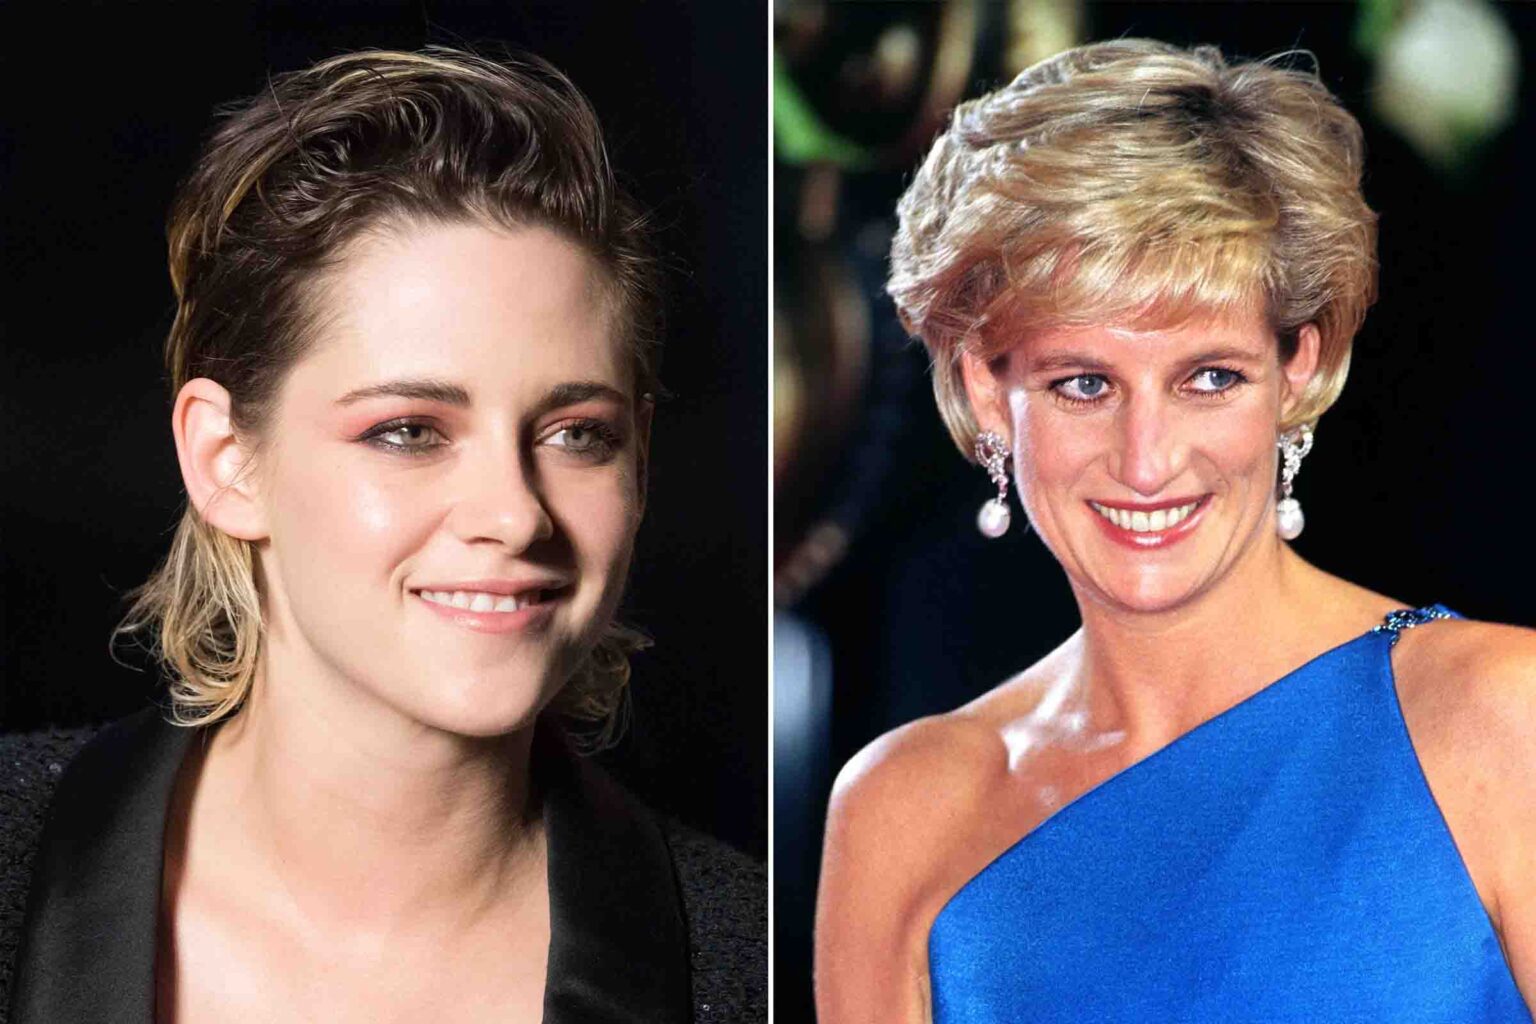 Looking for some new Kristen Stewart movies? 'Spencer', a movie about Princess Diana, will be a film to keep an eye out for.